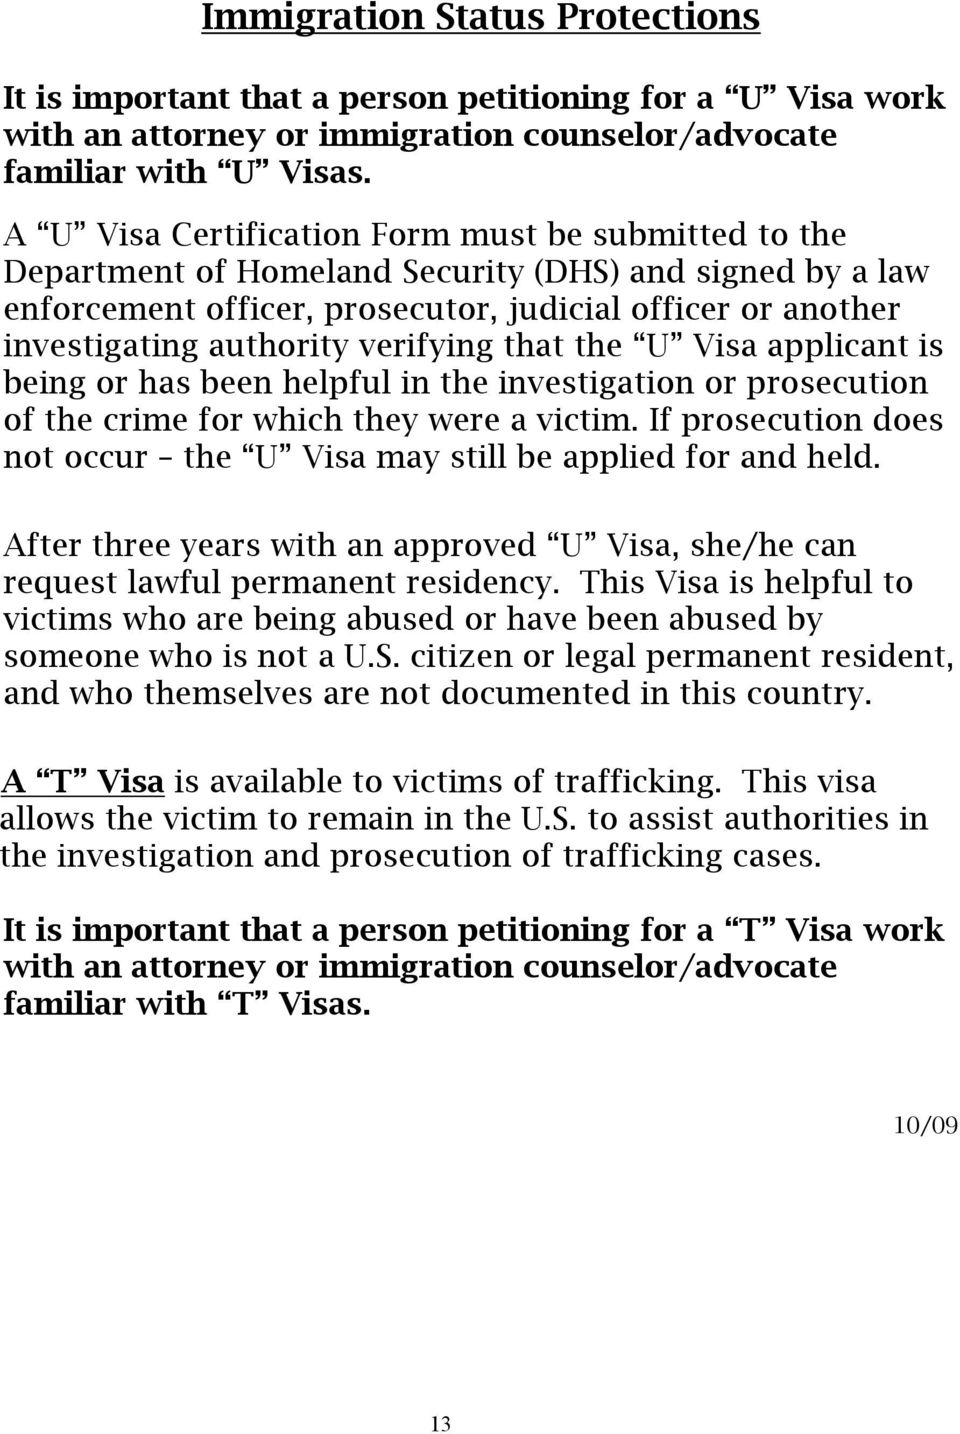 verifying that the U Visa applicant is being or has been helpful in the investigation or prosecution of the crime for which they were a victim.